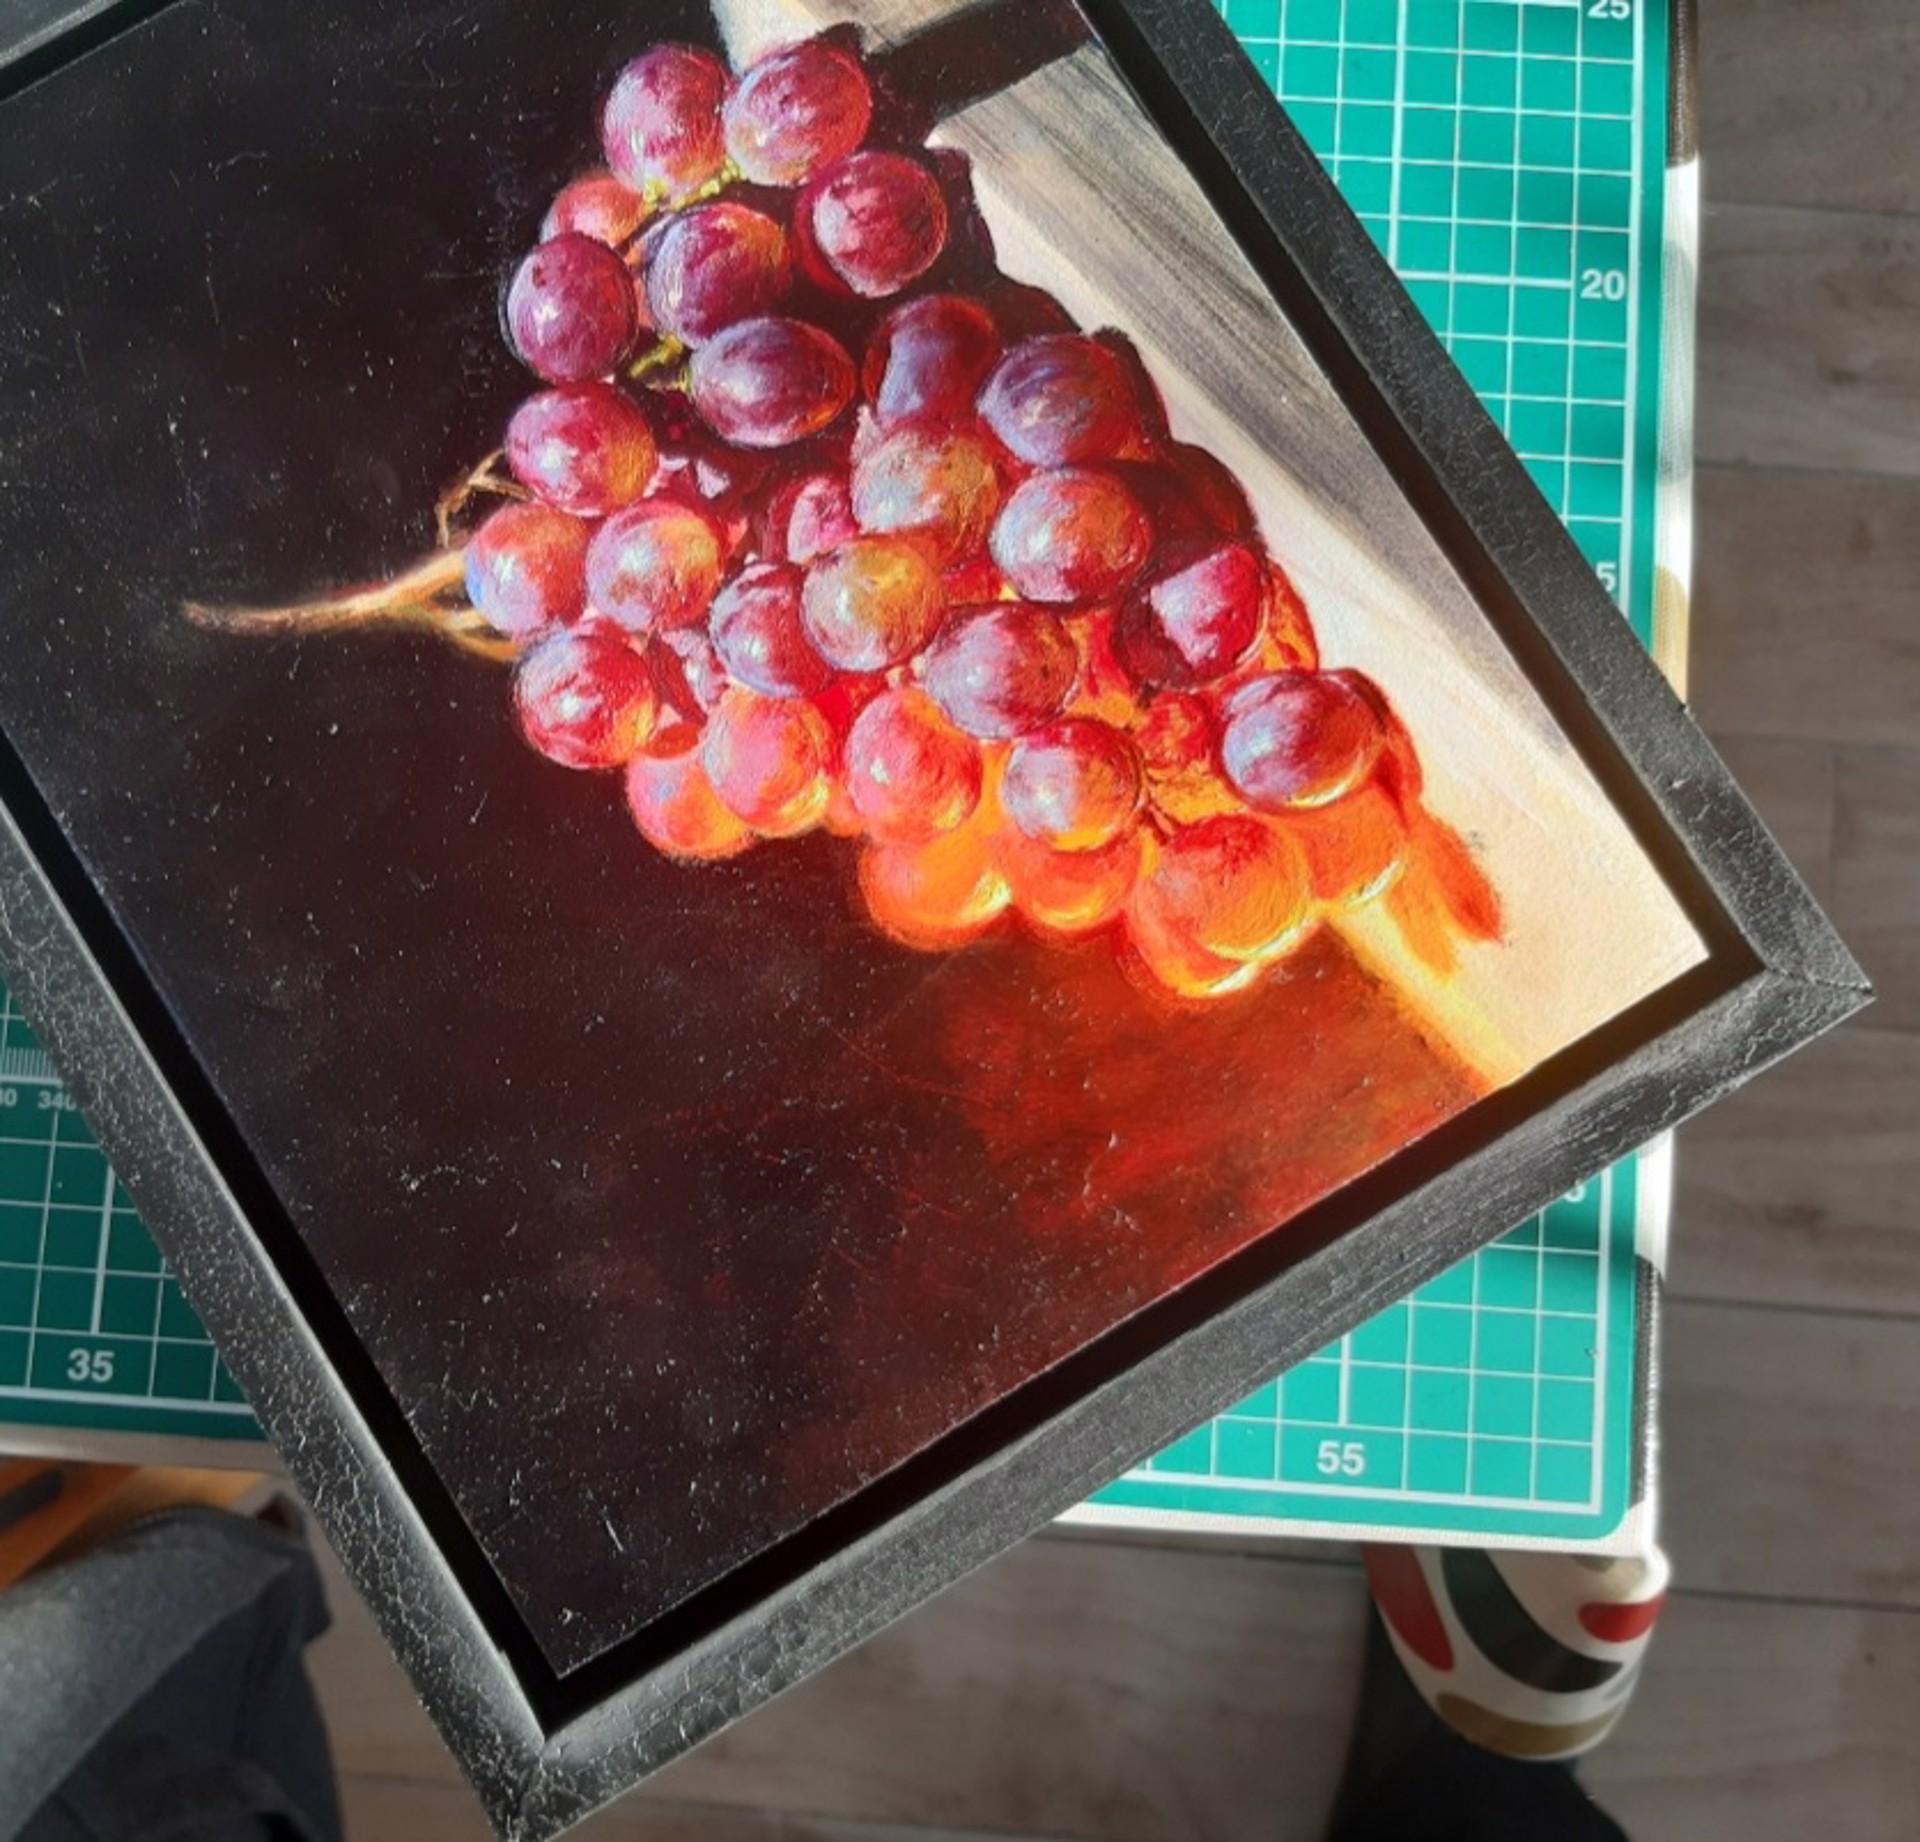 Red Grapes II by Daire Lynch